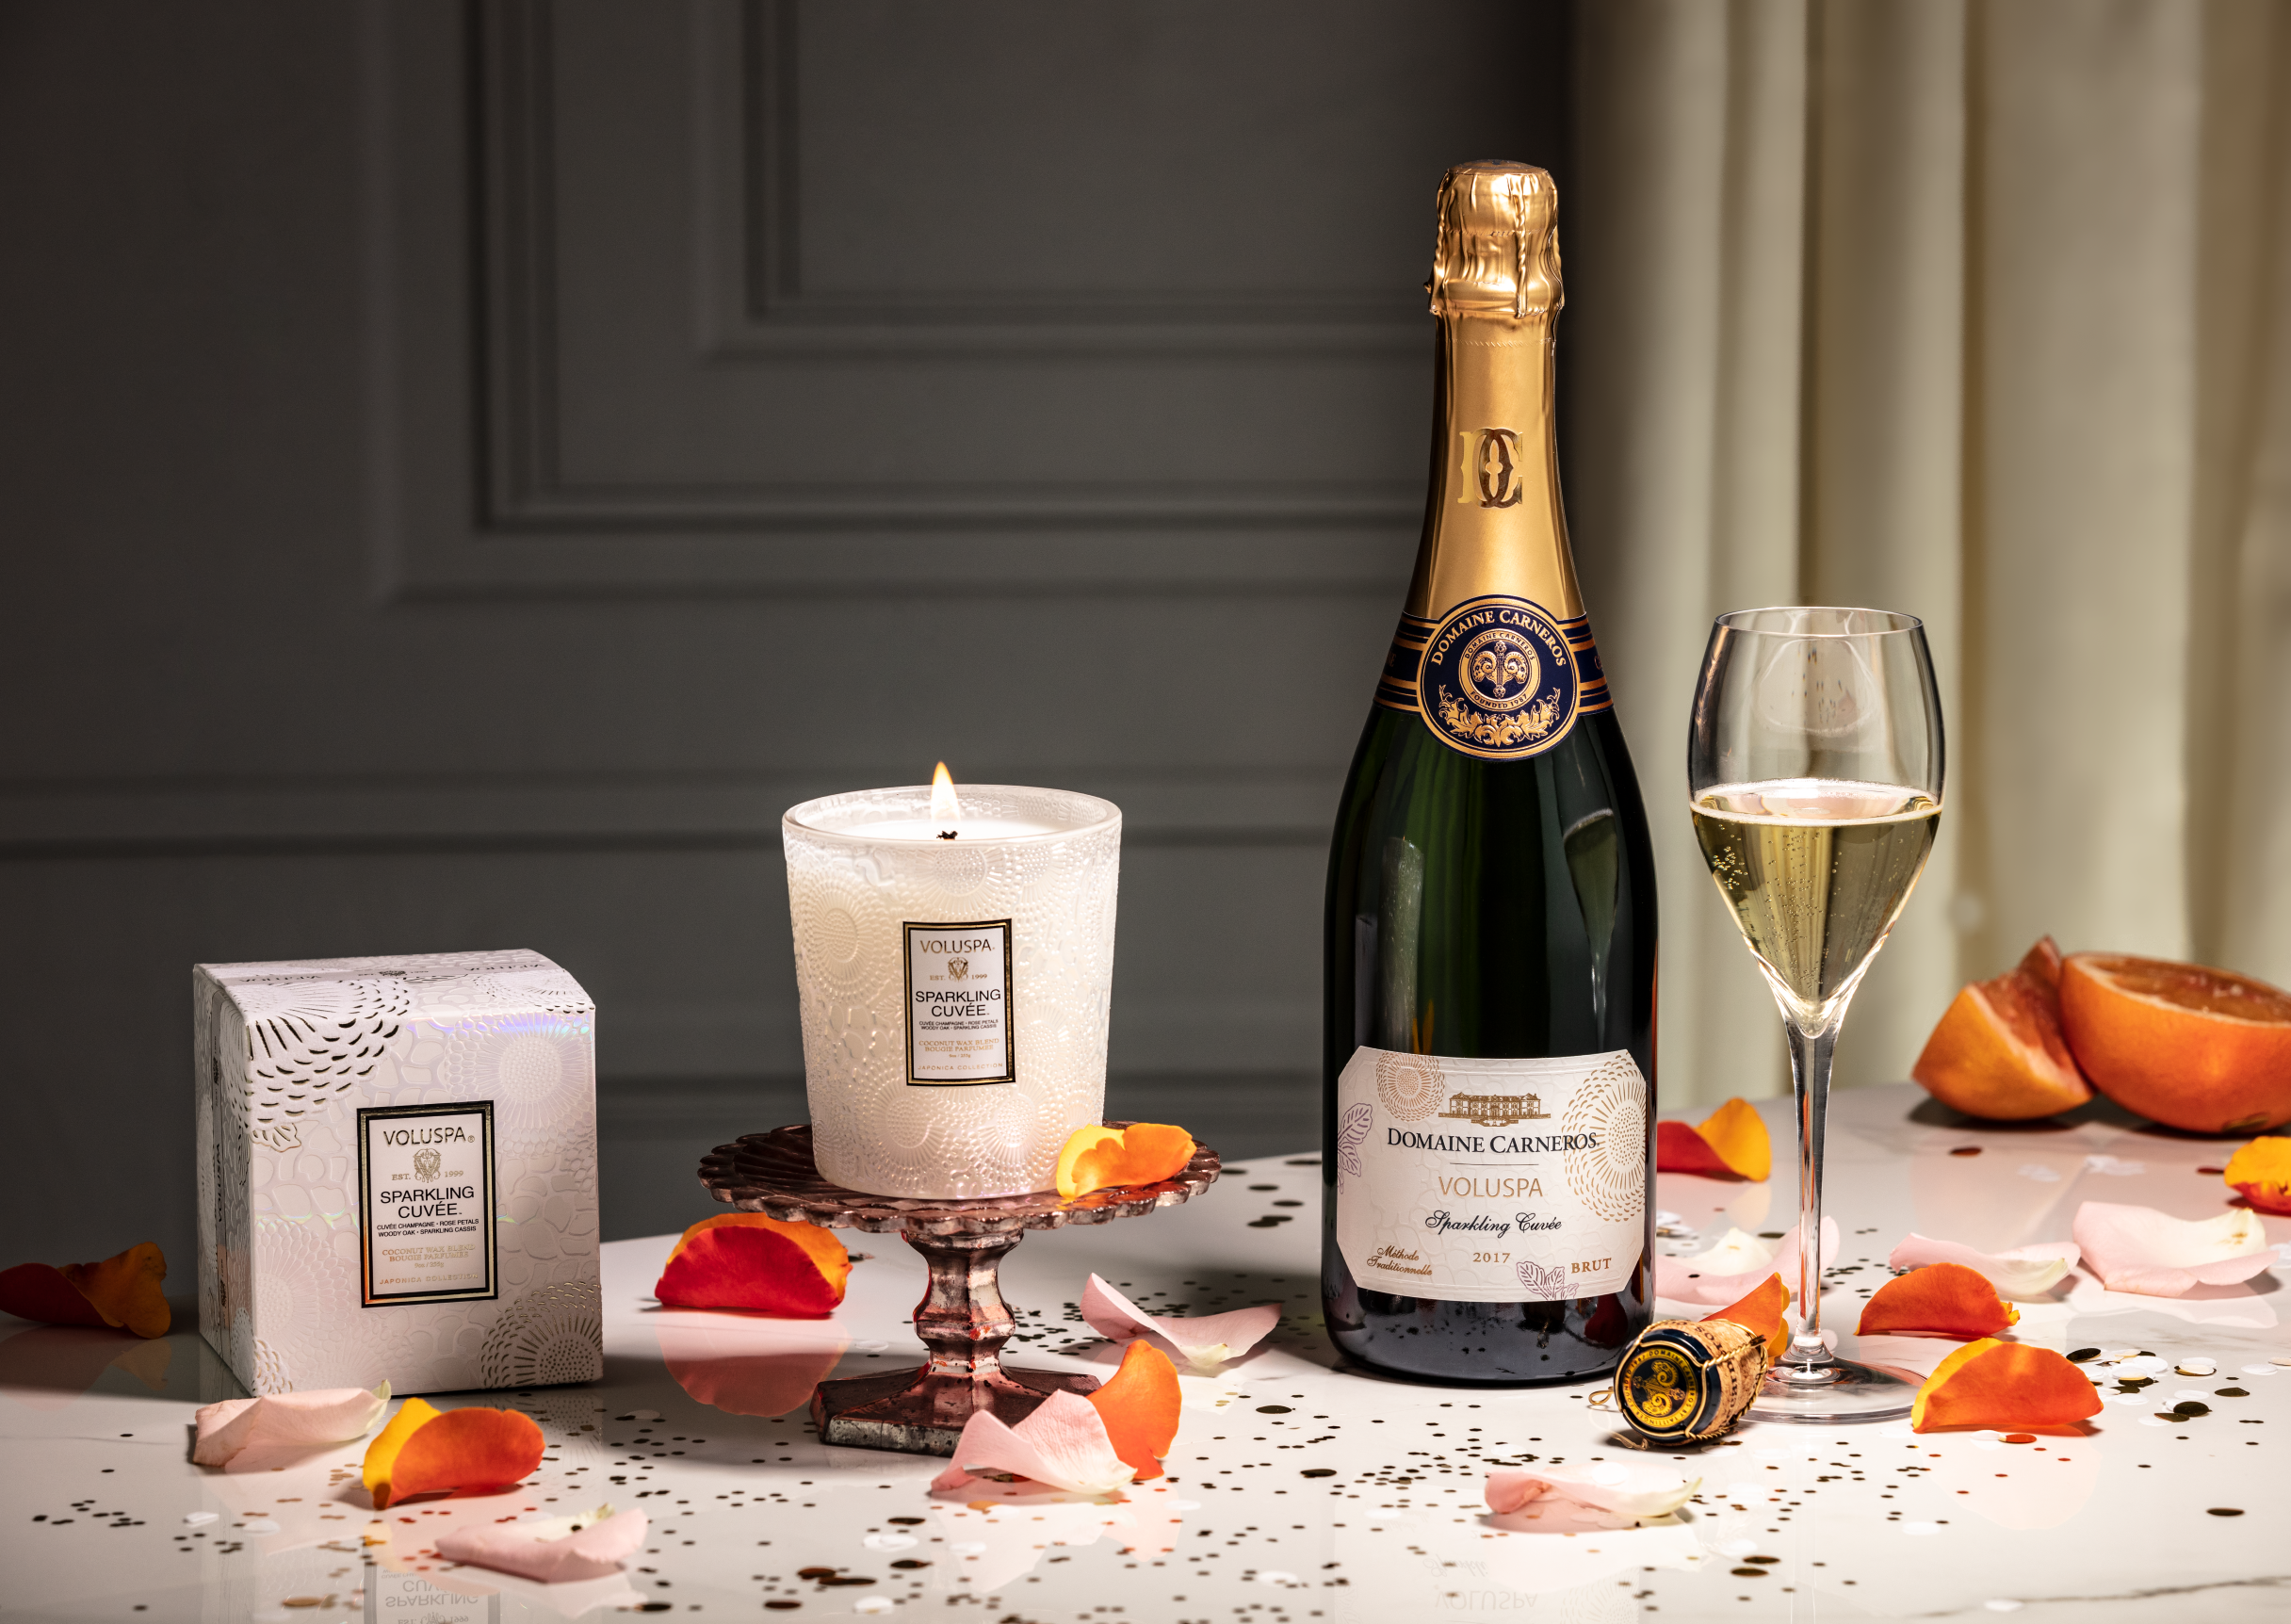 Voluspa and Domaine Carneros by Taittinger welcome the holiday season with the Sparkling Cuvée Candle and Sparkling Wine duo